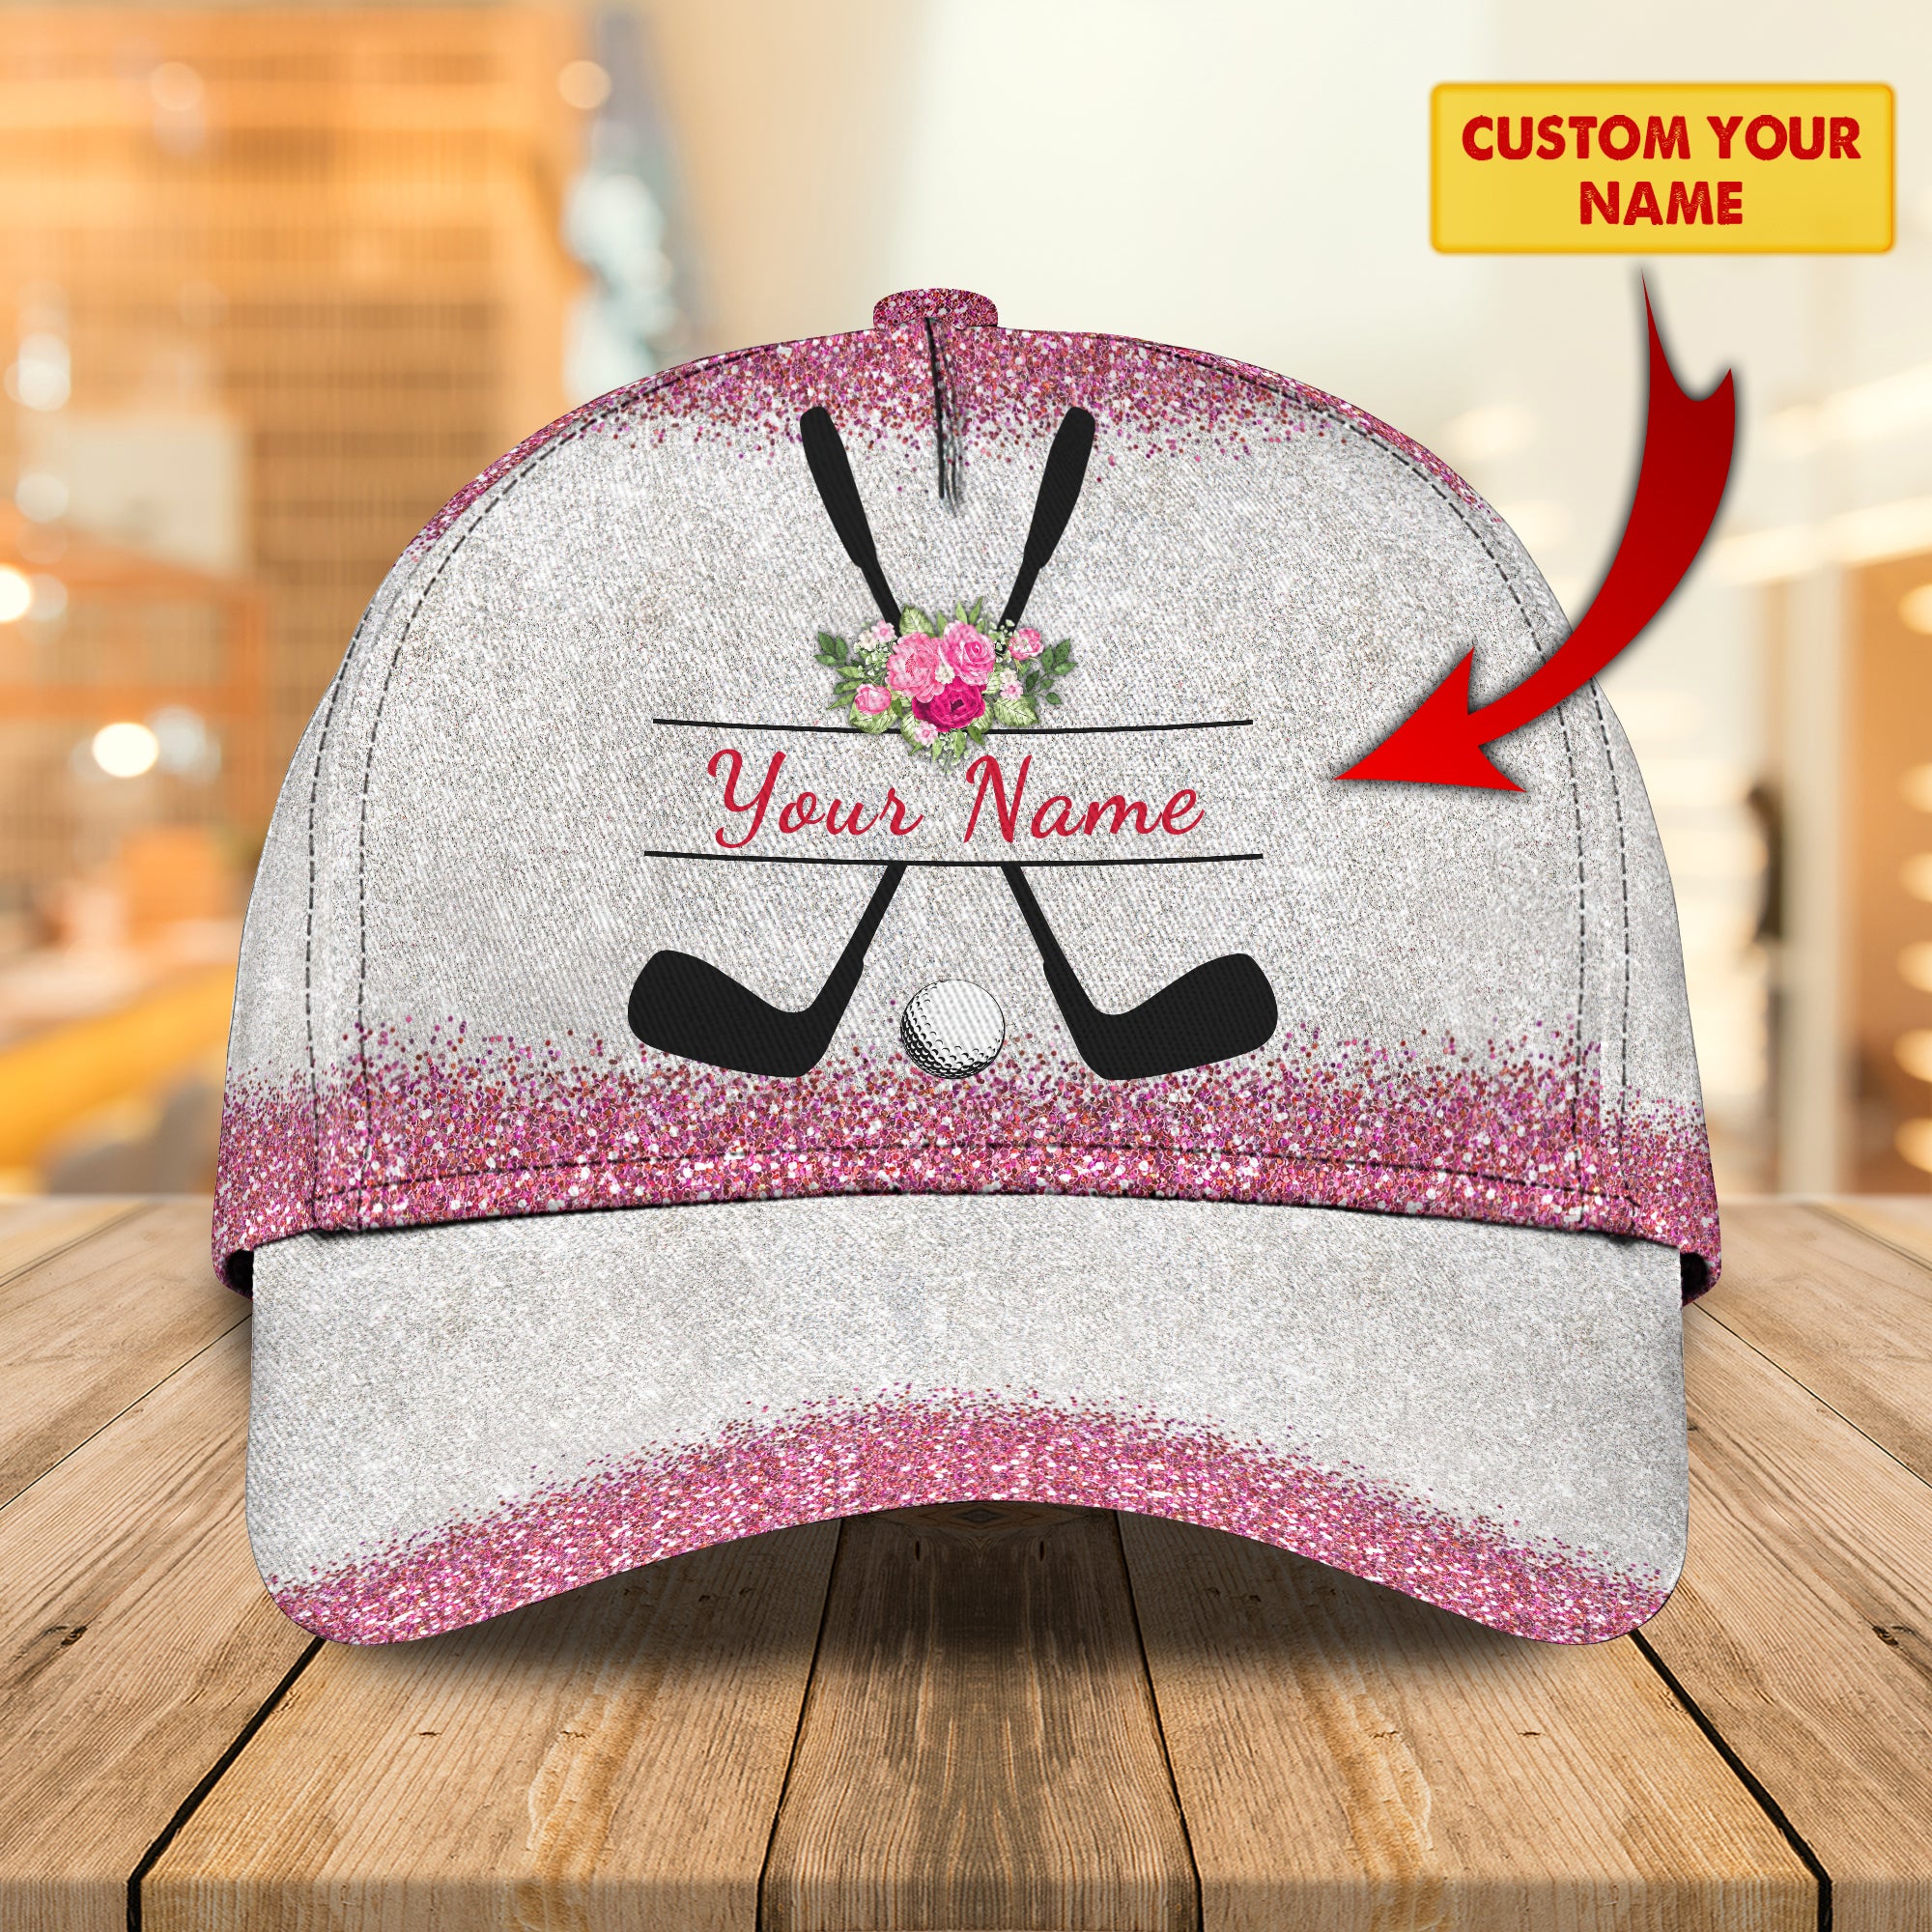 Golf - Personalized Name Cap - DAT93-013